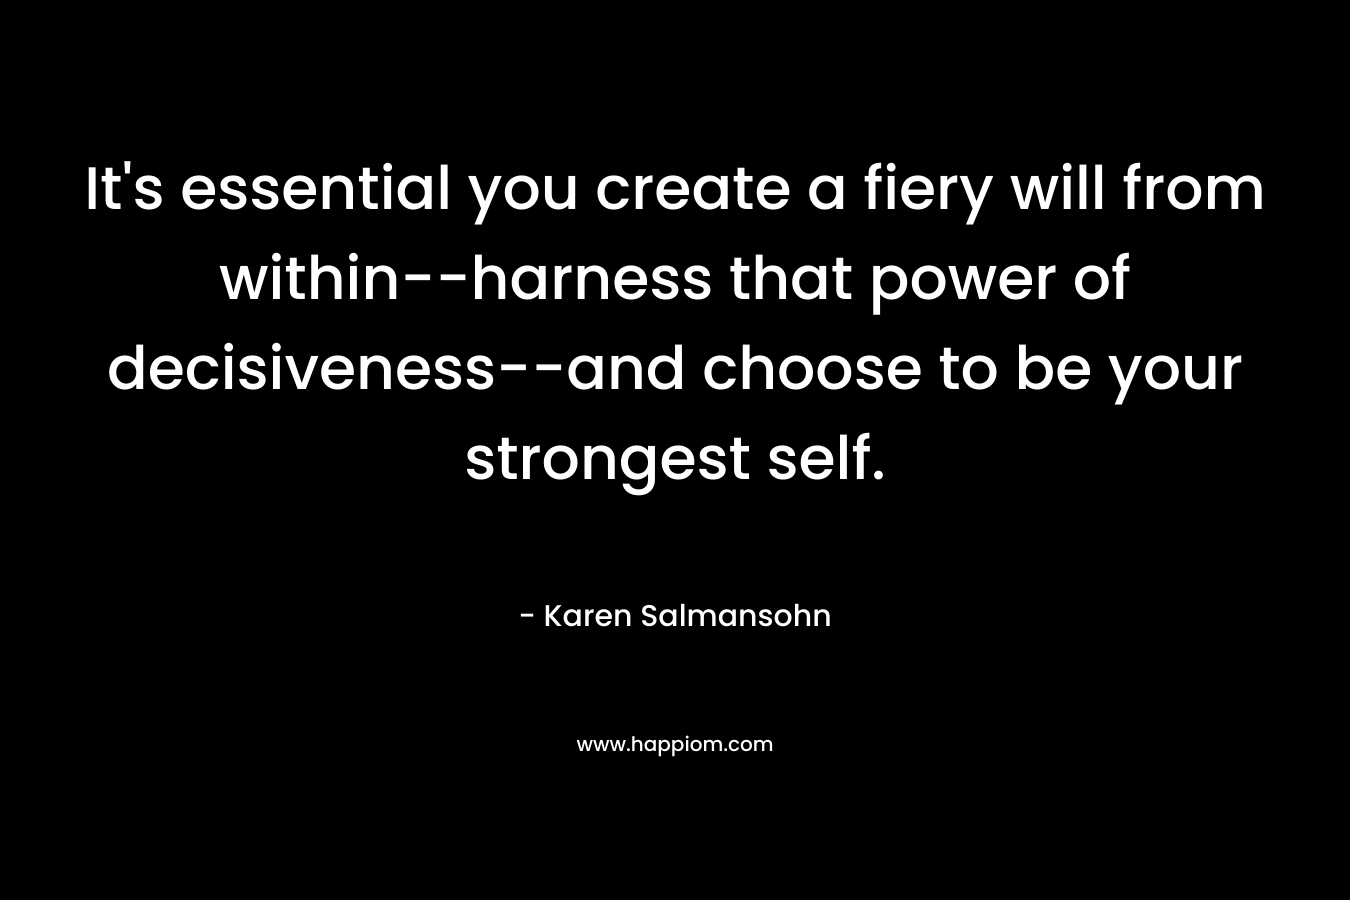 It’s essential you create a fiery will from within–harness that power of decisiveness–and choose to be your strongest self. – Karen Salmansohn